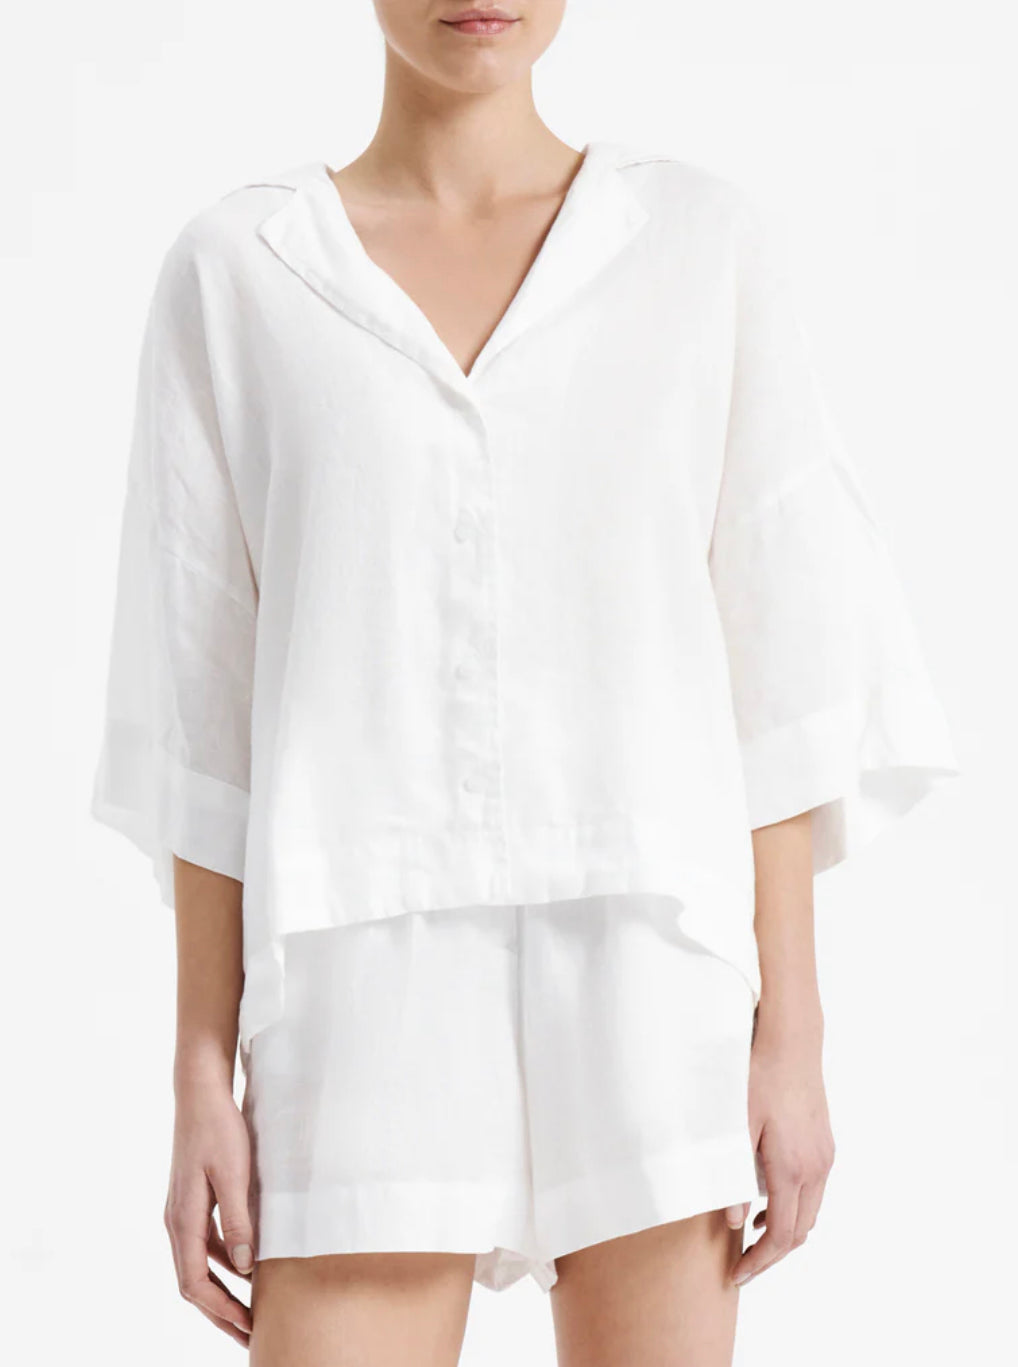 Nude Lucy The Lounge Linen Shirt - White